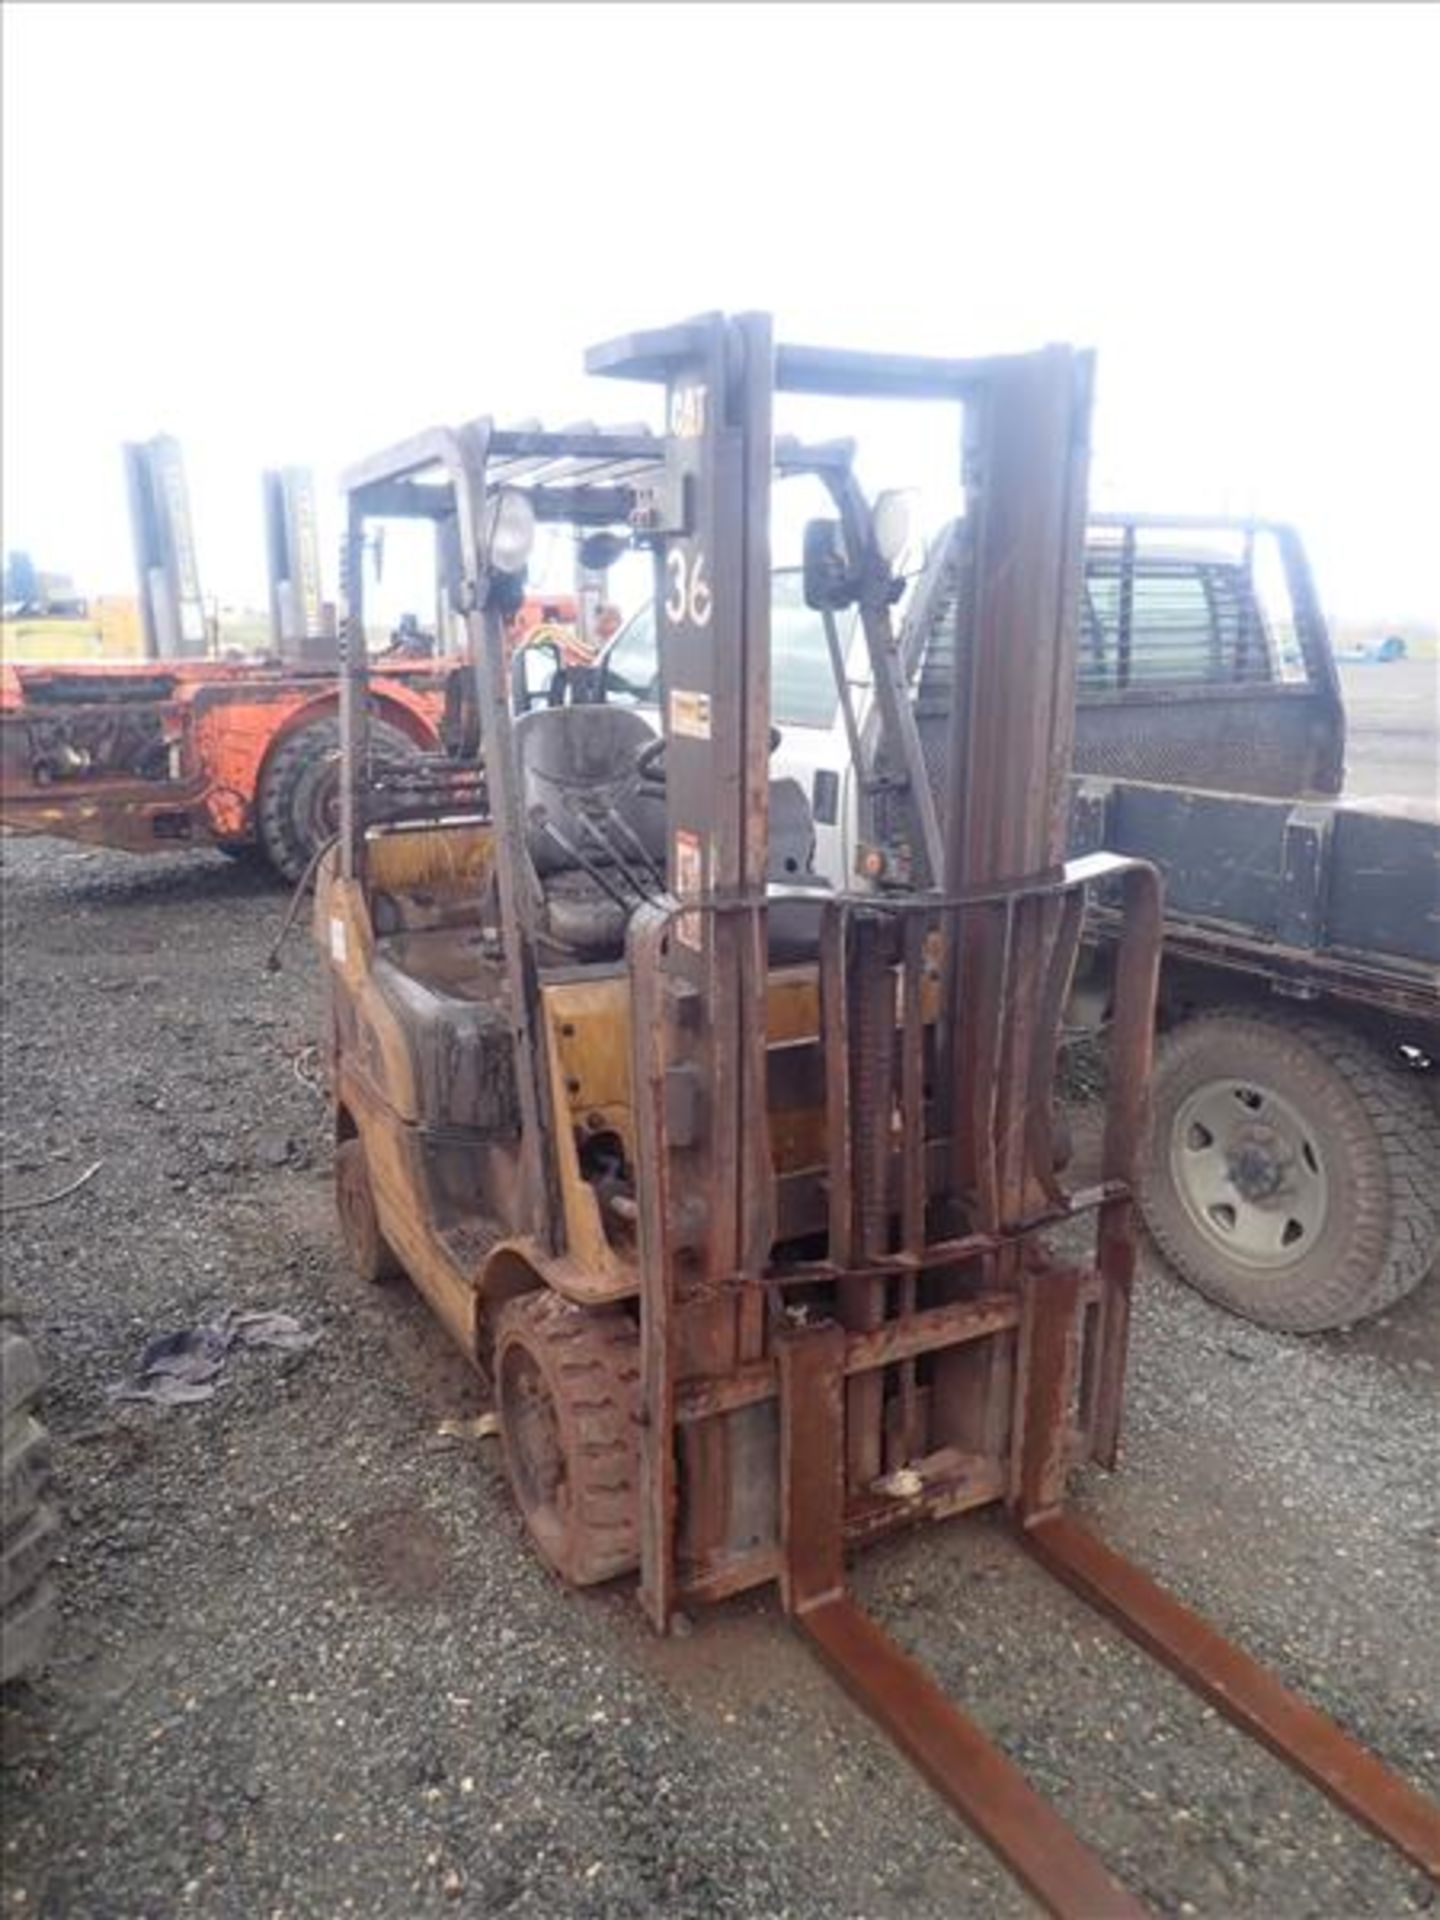 CAT forklift truck, mod. C5000, ser. no. AT9004293, 3000 lbs cap., propane, 2-stage mast (Tag 8444